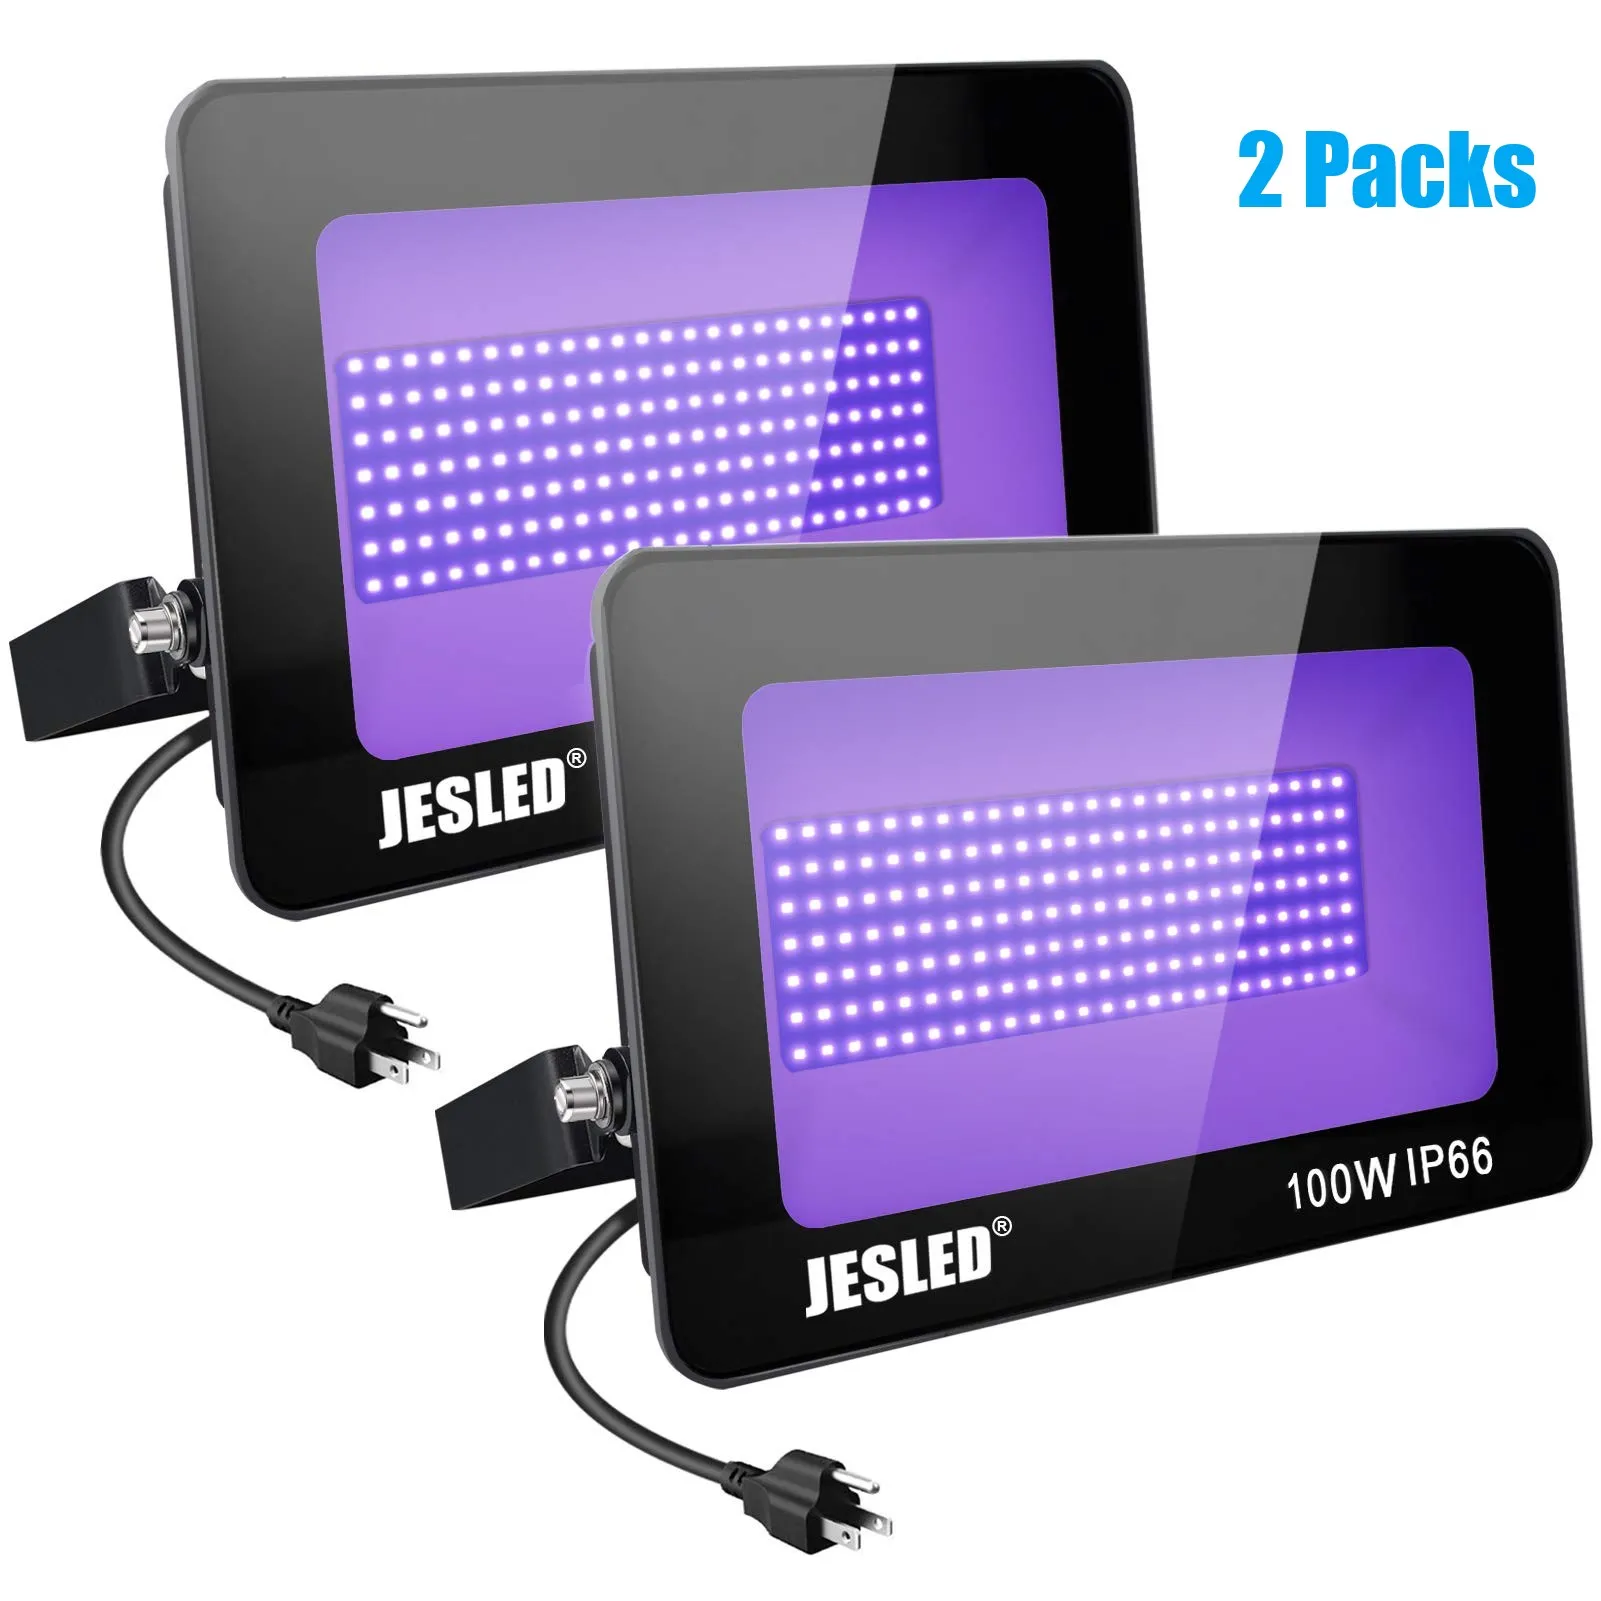 US Stock 100W LED Blacks DLIDLAY 2 Pack Blacklights for Glow Flood Lights with plc pled IP66 Stage Stage Lighting Aquarium Paint Paint Black Party Room Party